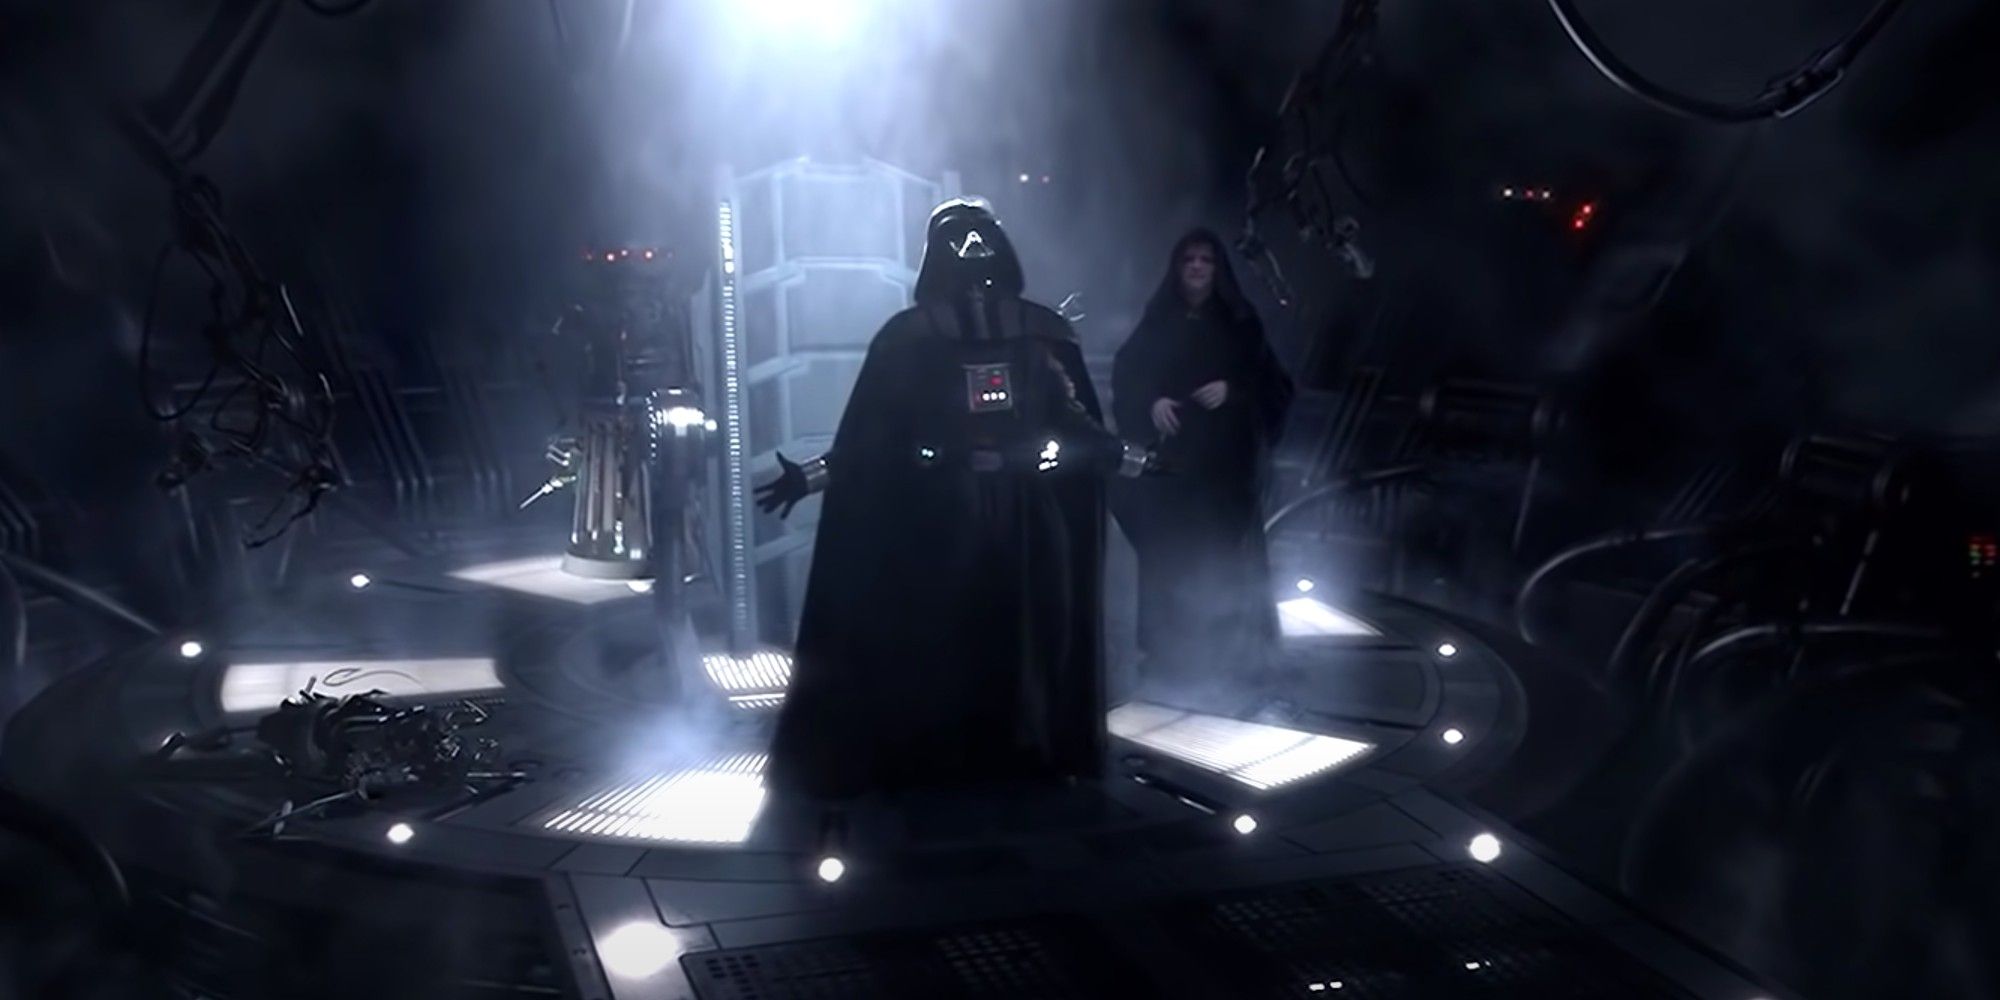 Darth Vader screams about Padme's death in Star Wars: Revenge of the Sith